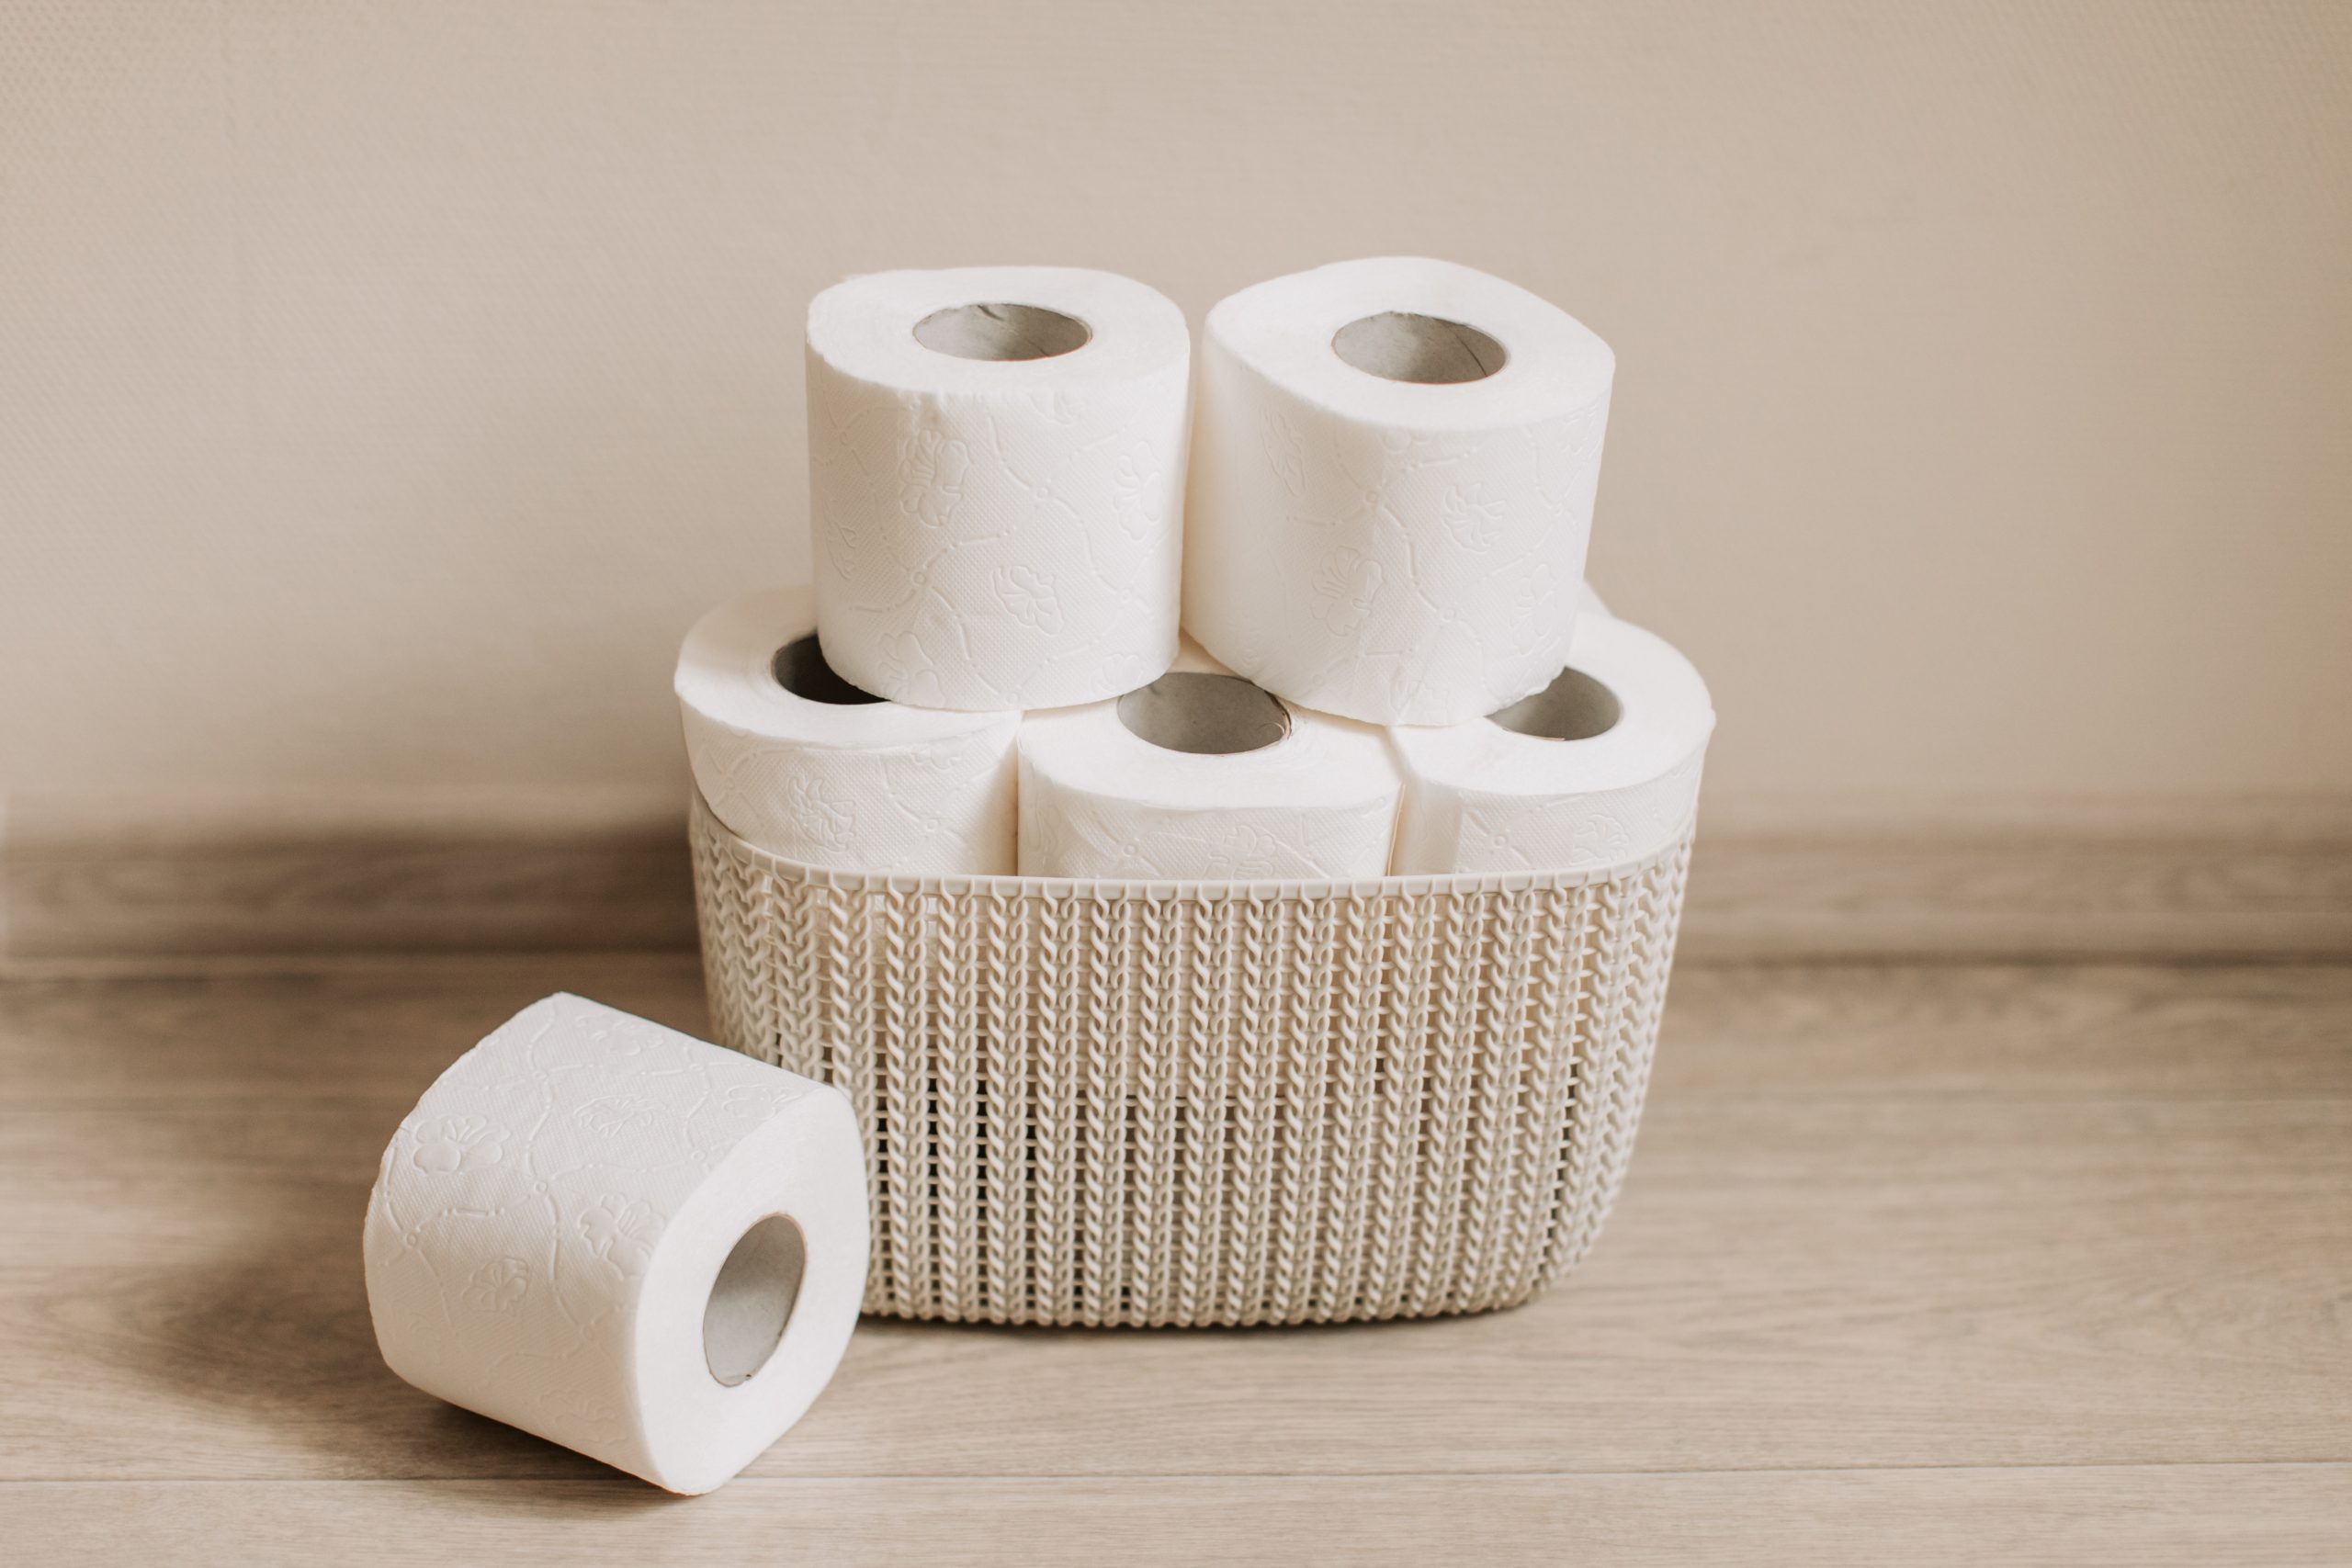 Virgin Jumbo Toilet Tissue - Chaozhou Soft Paper Products Co.,Ltd